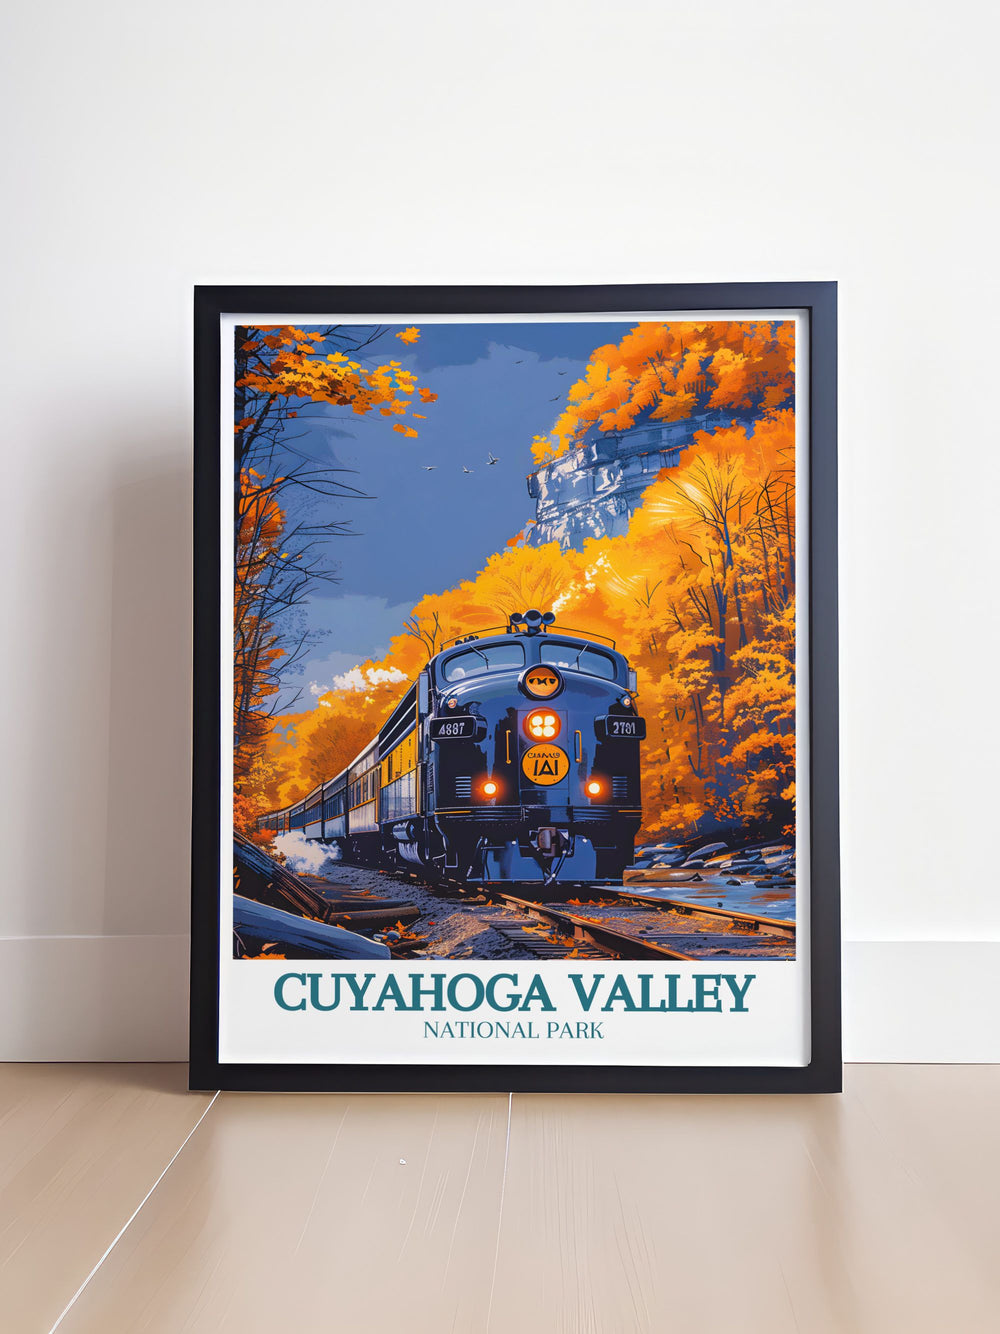 Stunning travel poster of Cuyahoga Valley Scenic Railroad, capturing the historical charm and scenic views along the Cuyahoga River. Perfect for adding a touch of history and natural beauty to your living space.